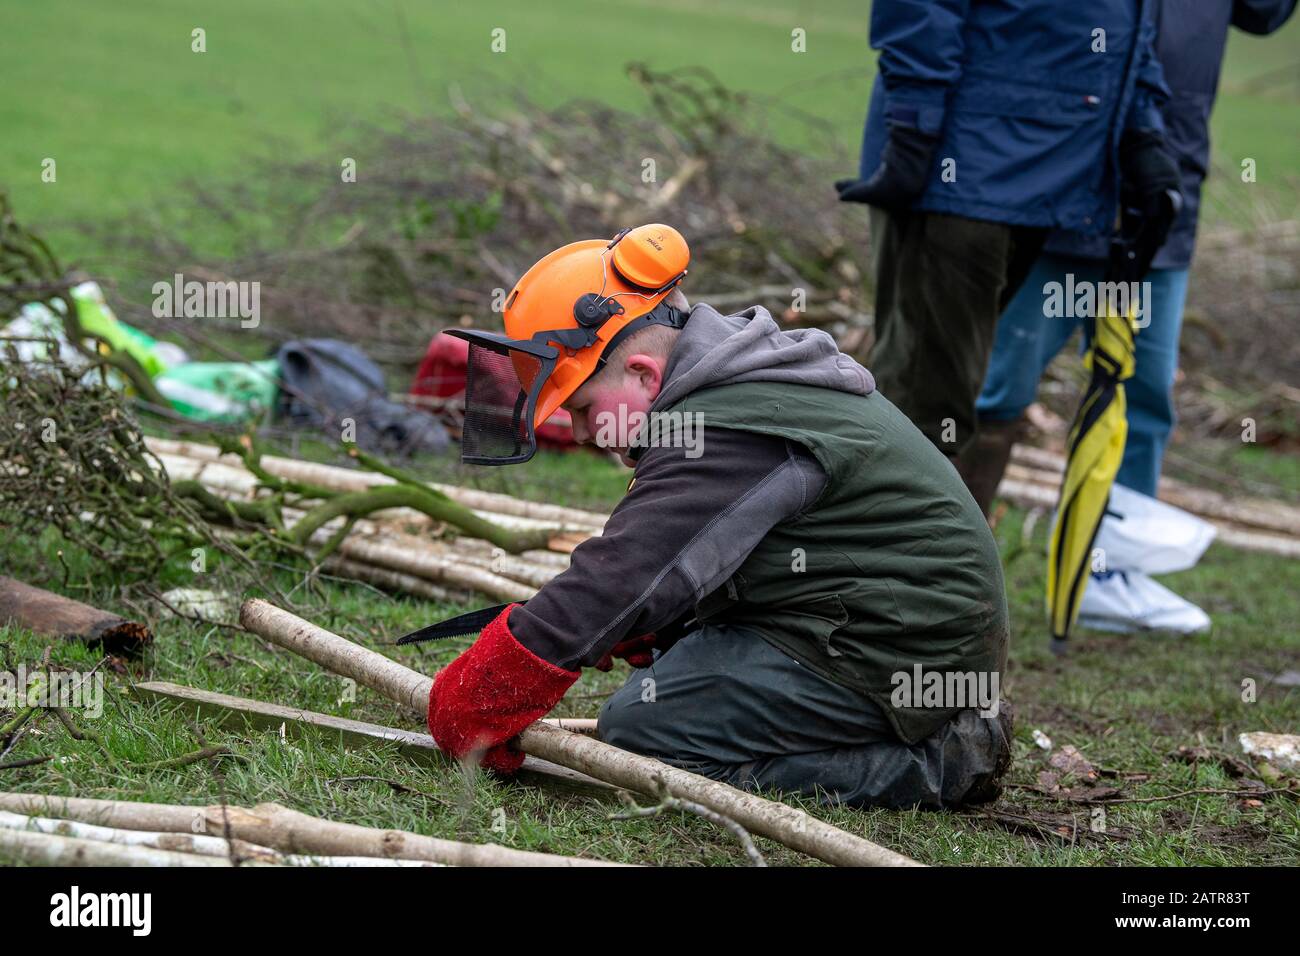 Teaching youngsters the traditional skill of hedge laying on a field boundary, Cumbria, UK. Stock Photo